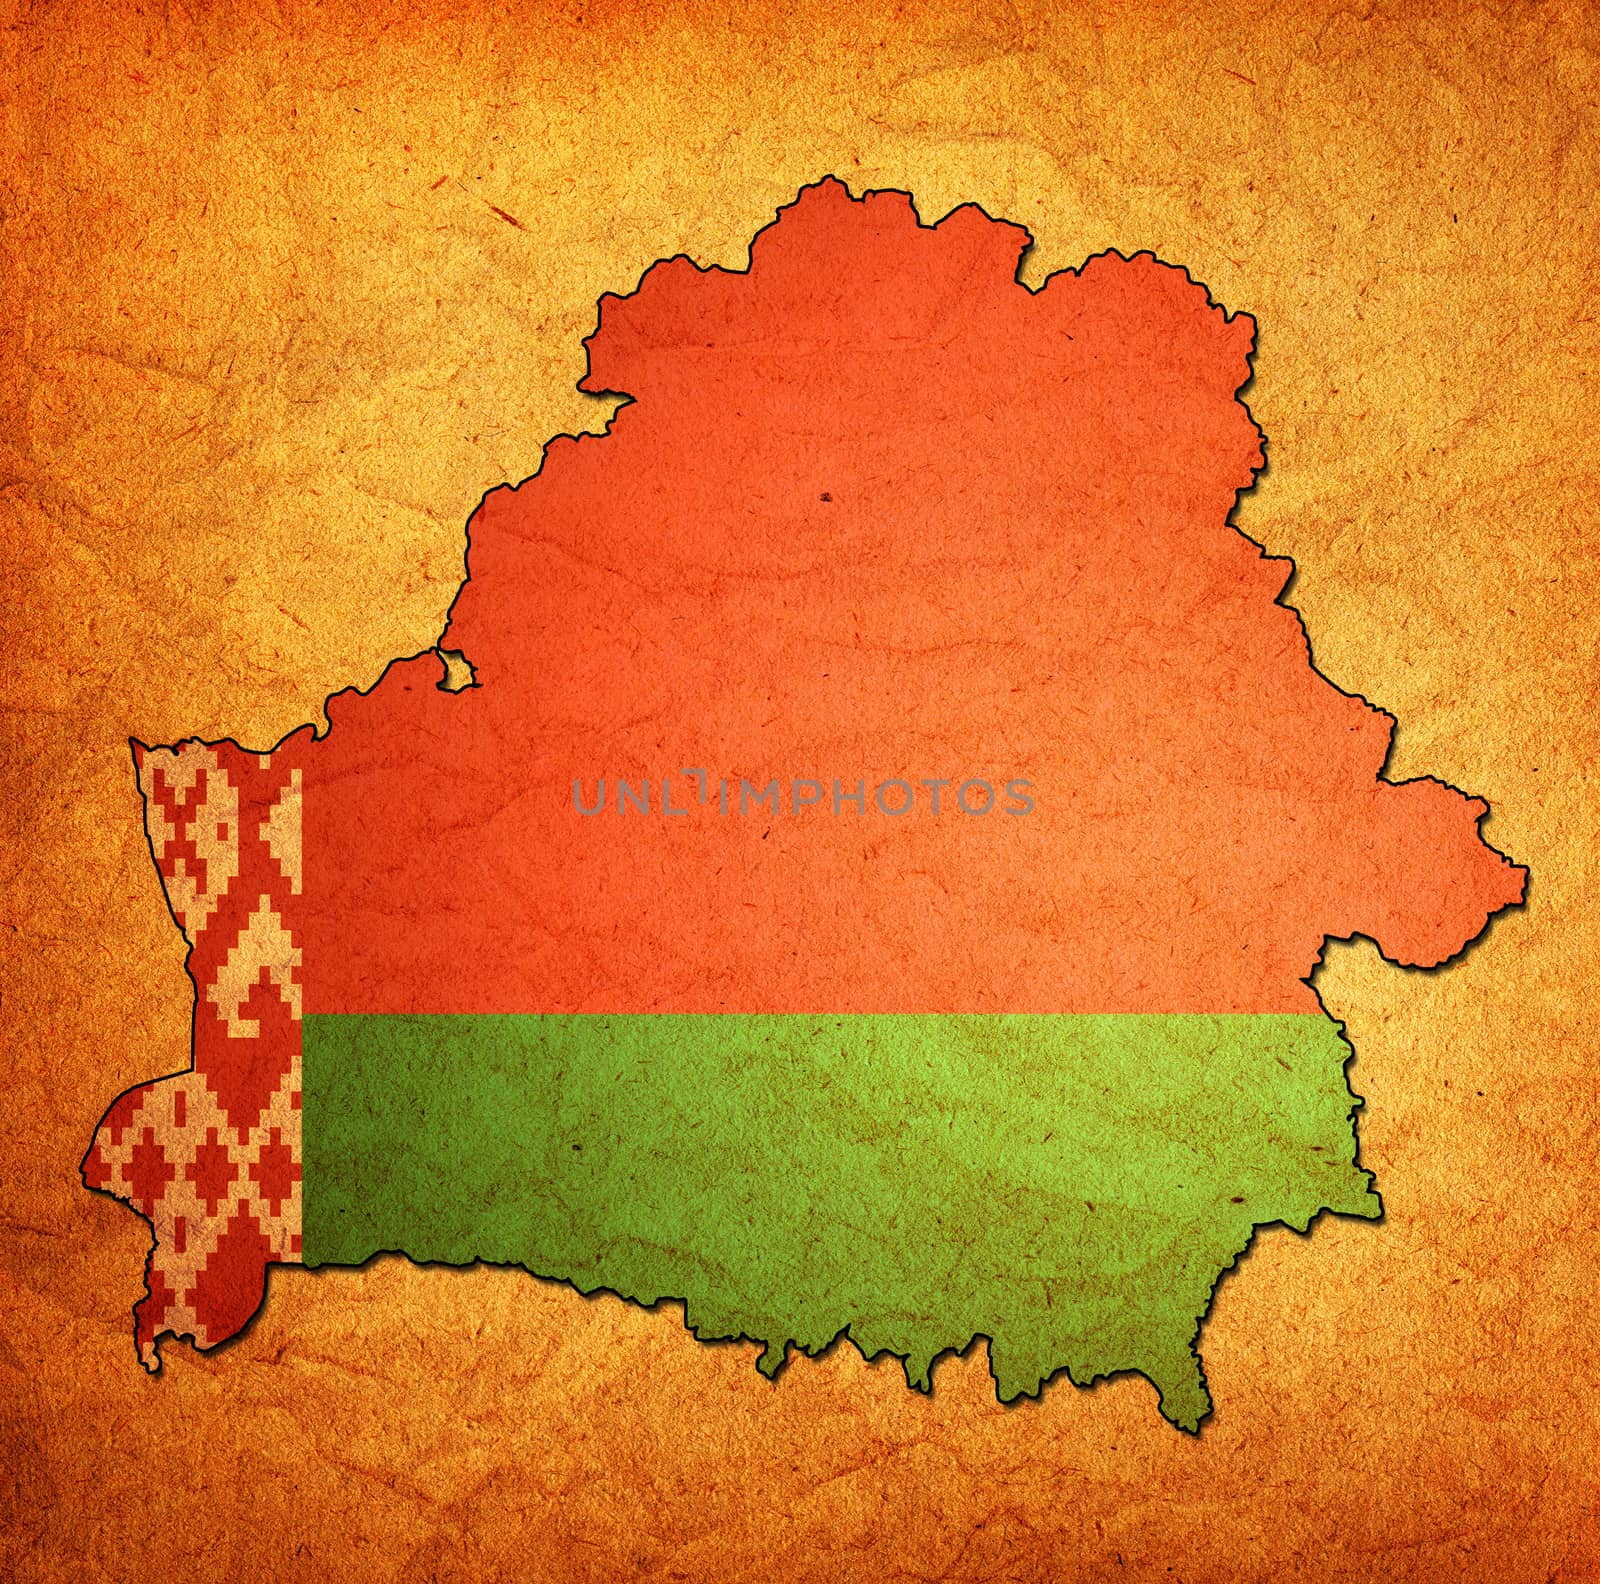 belarus territory with flag by michal812